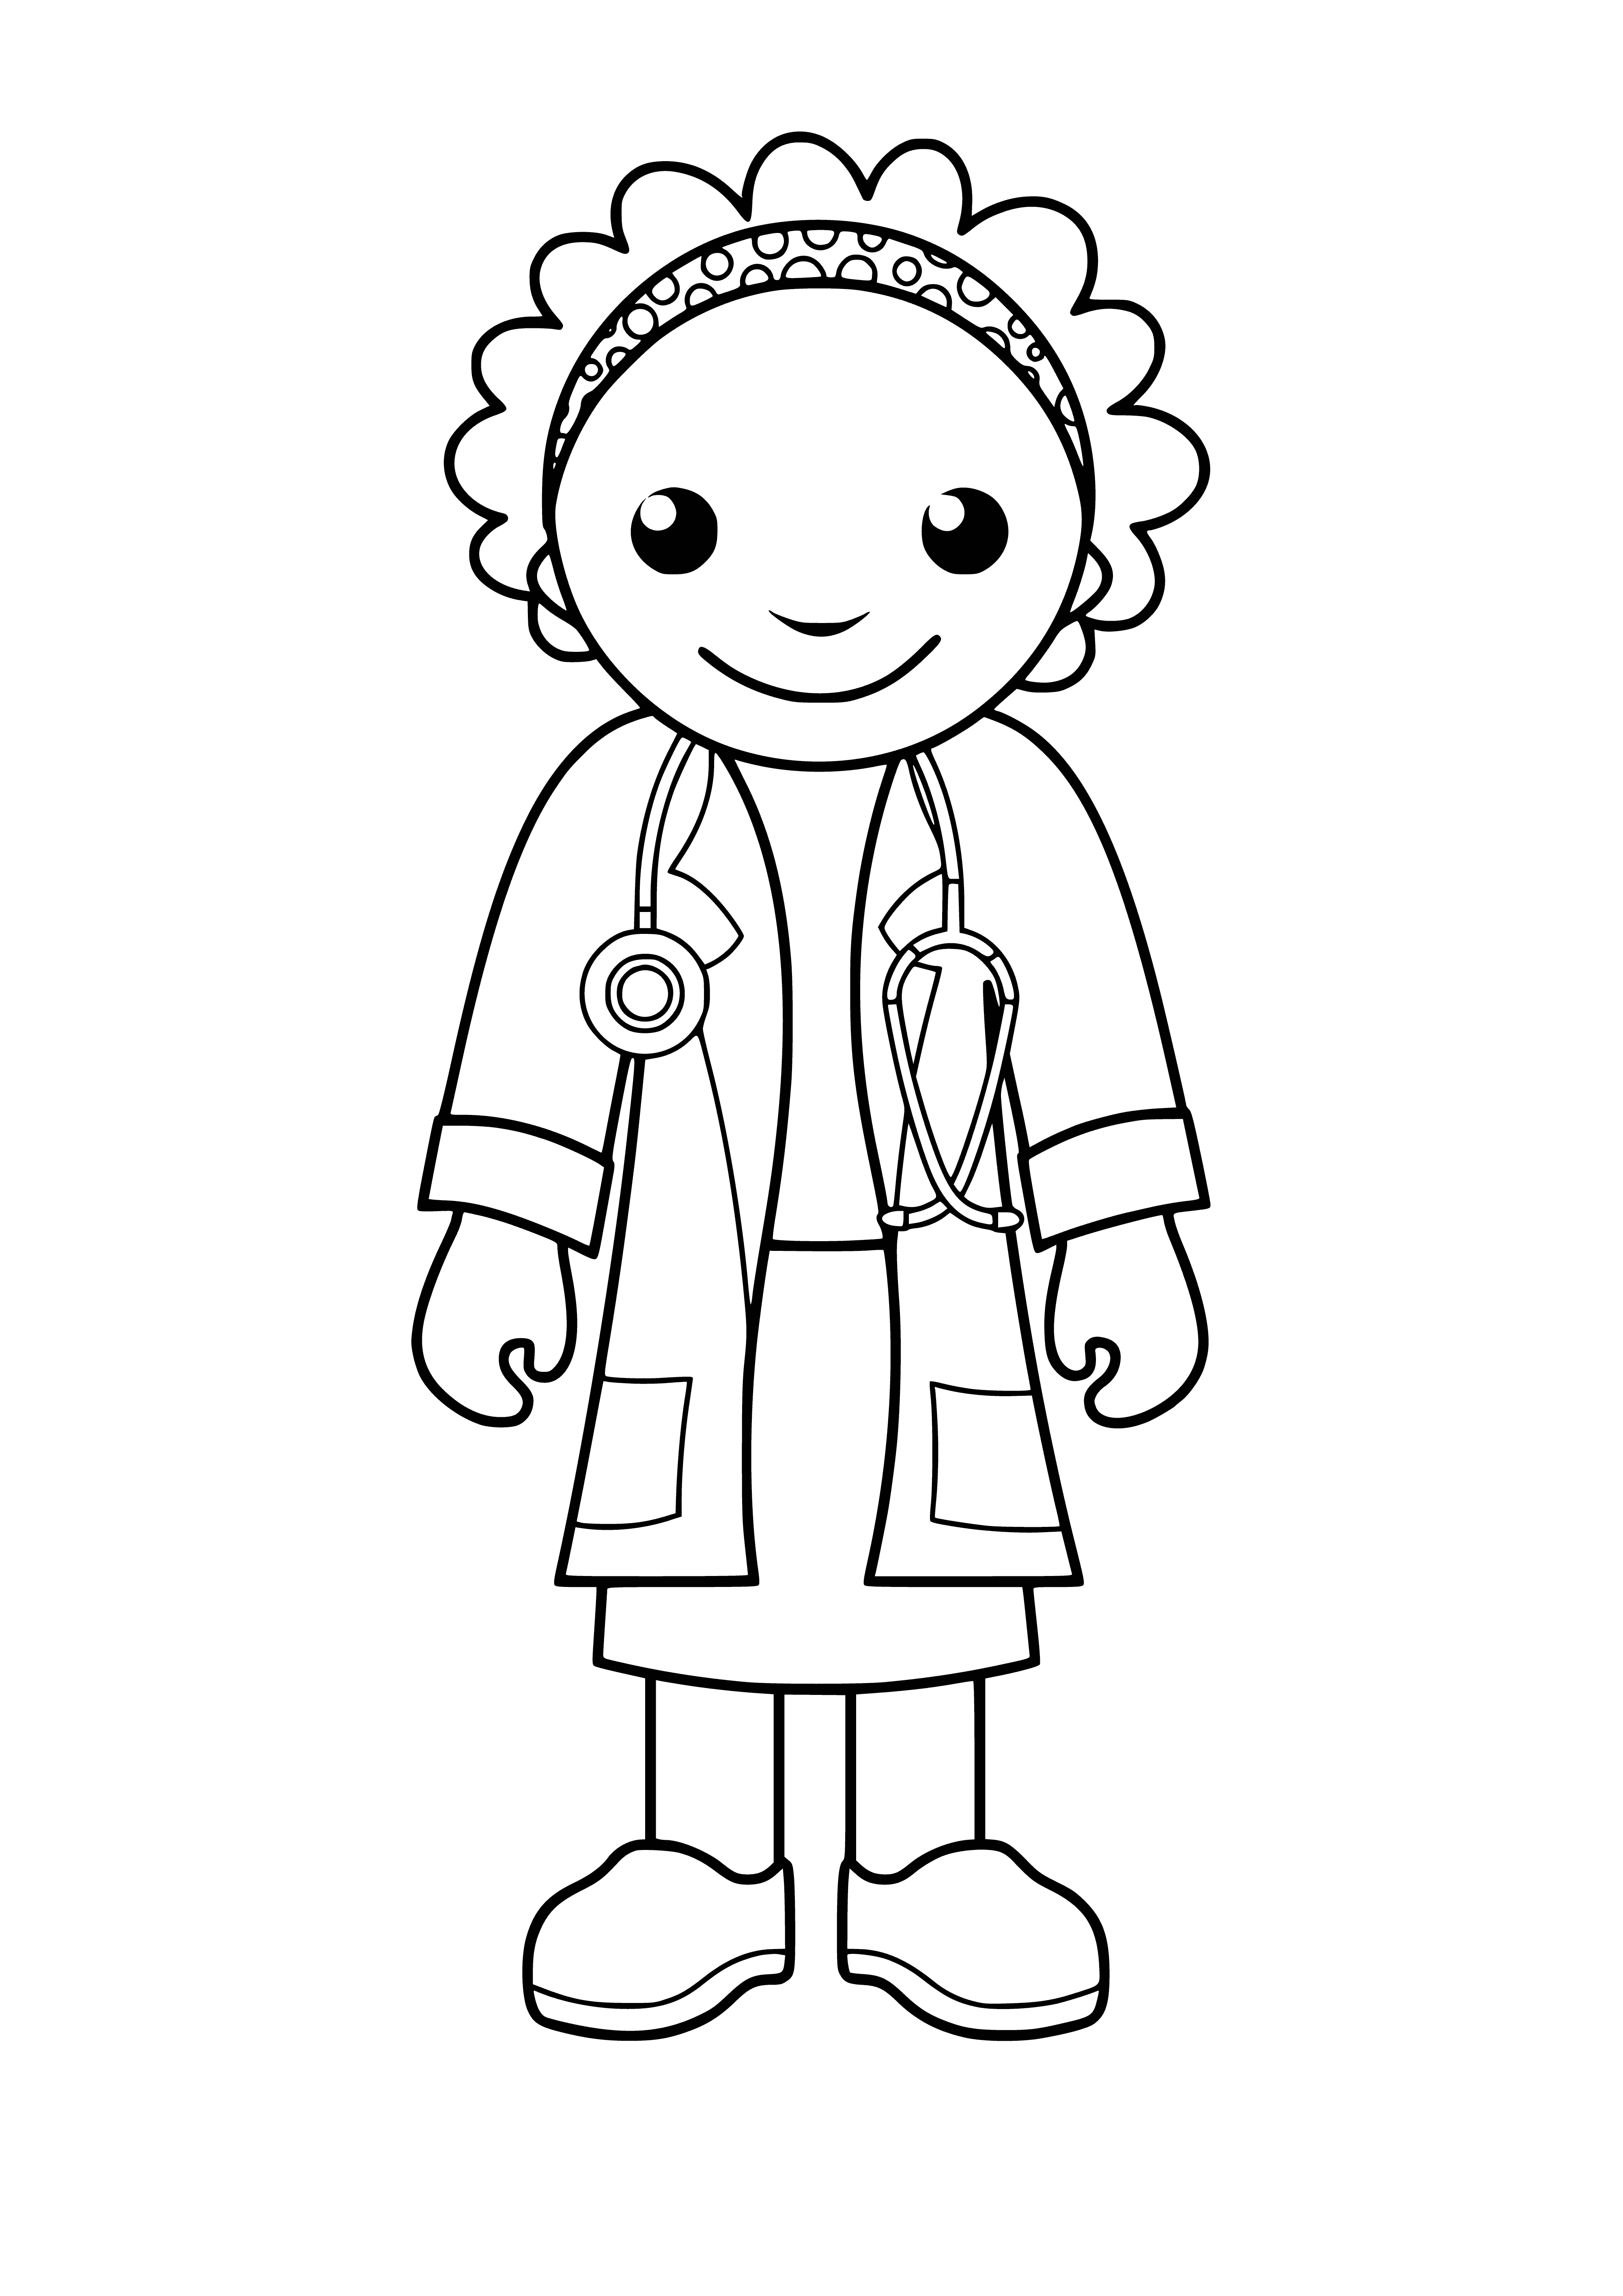 coloring page: A bald doctor in a white coat with a stethoscope around his neck is smiling in the coloring page.